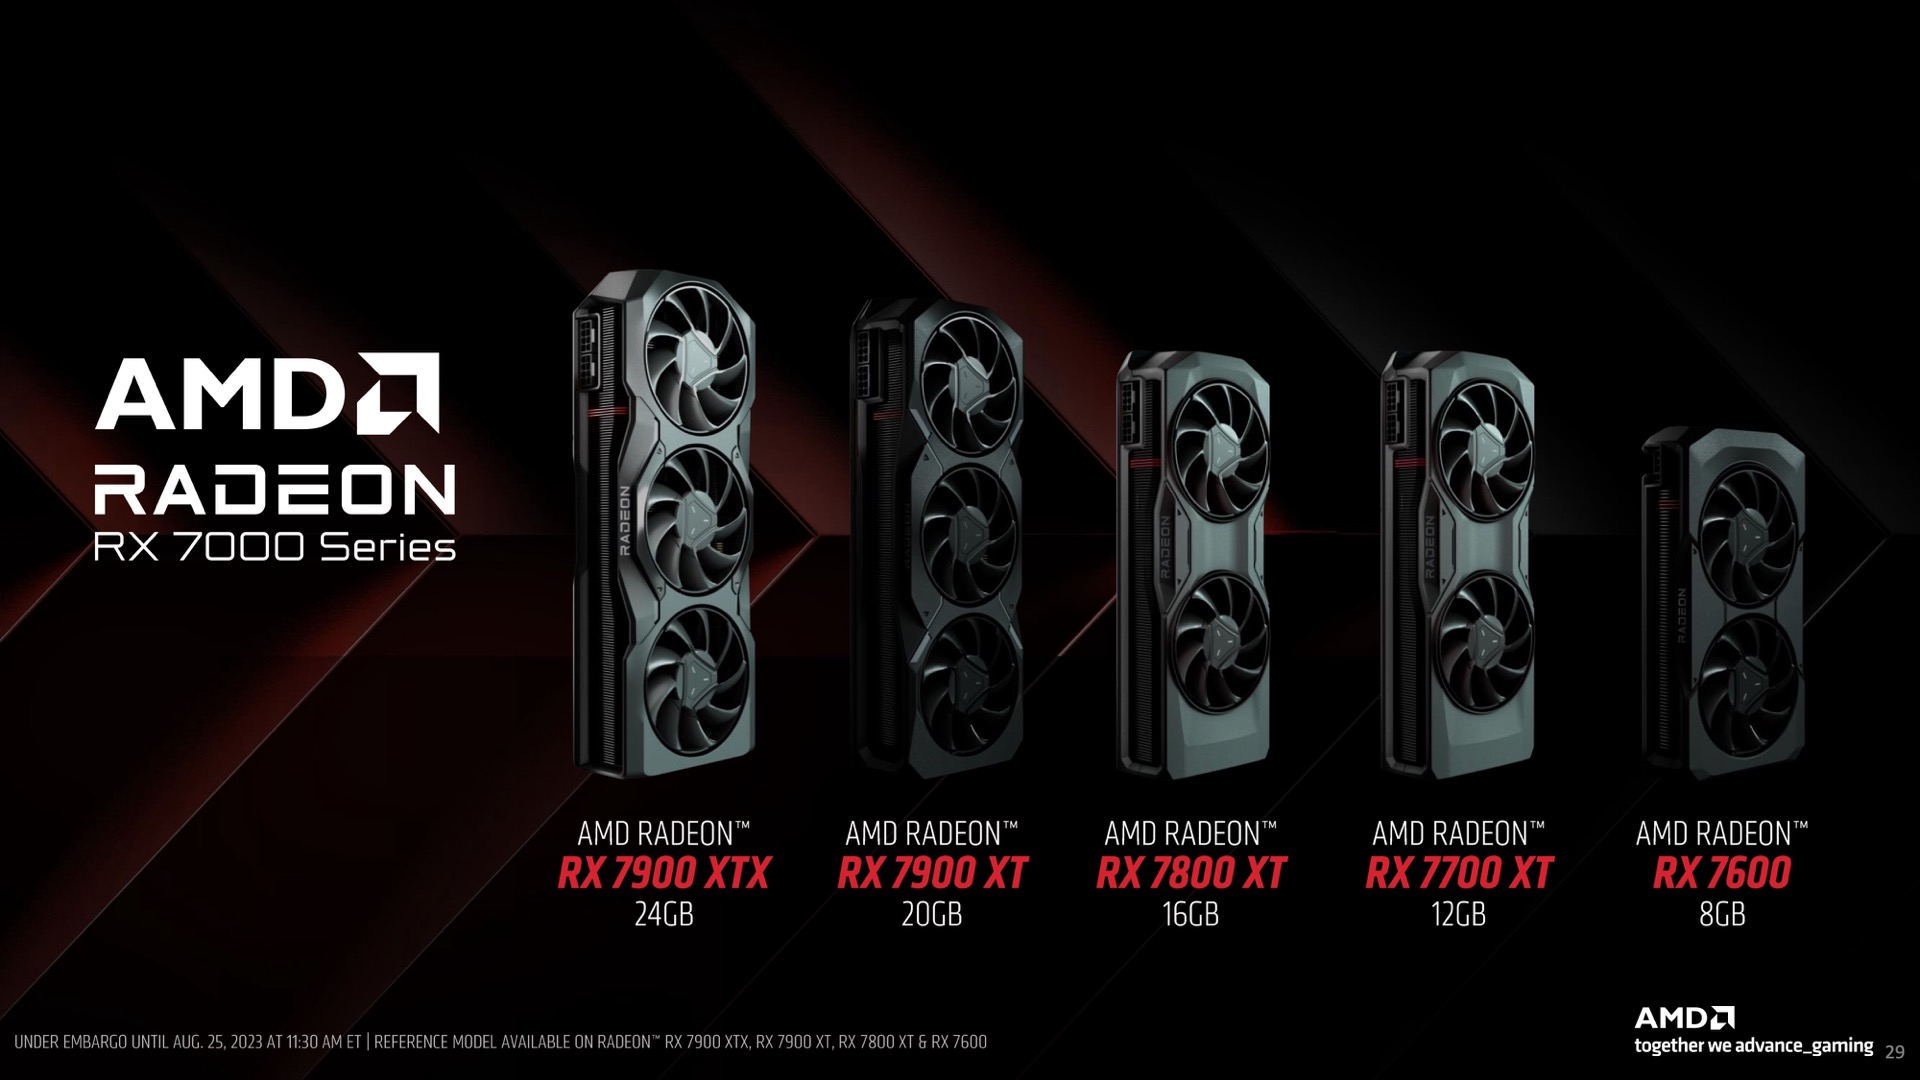 The full lineup of RX 7000-series graphics cards. AMD pictures a reference version of the 7700 XT, though it won't be selling one.